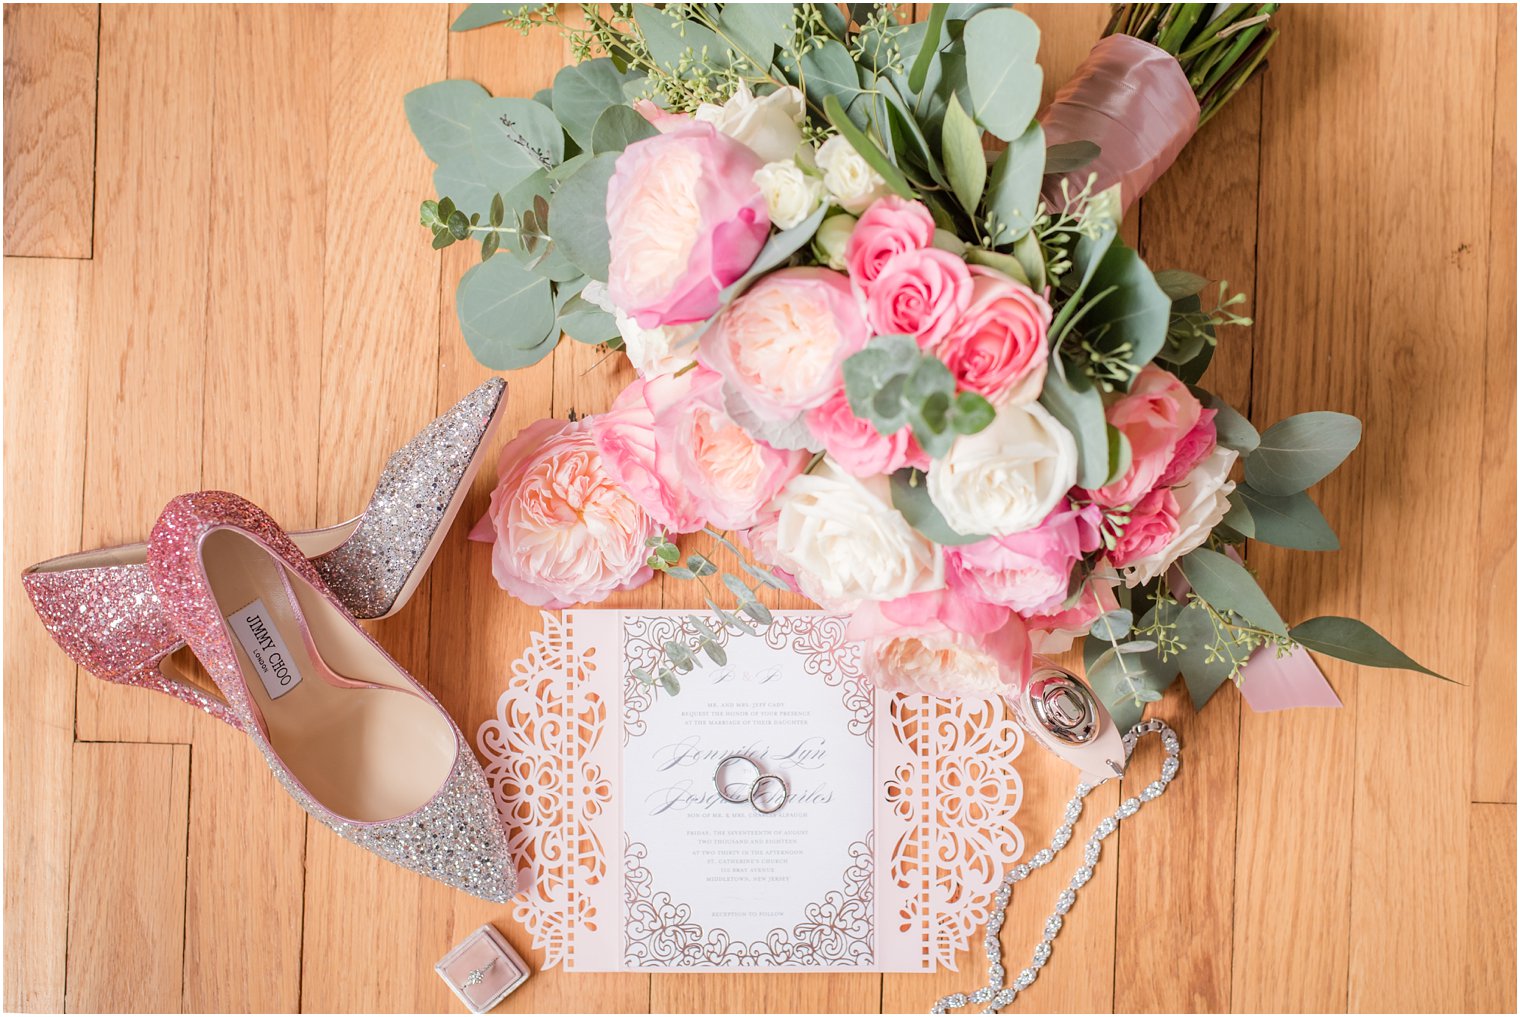 Jimmy Choo ombre shoes with pink peony wedding bouquet by Ashley's Floral Beauty and invitations by Shutterfly